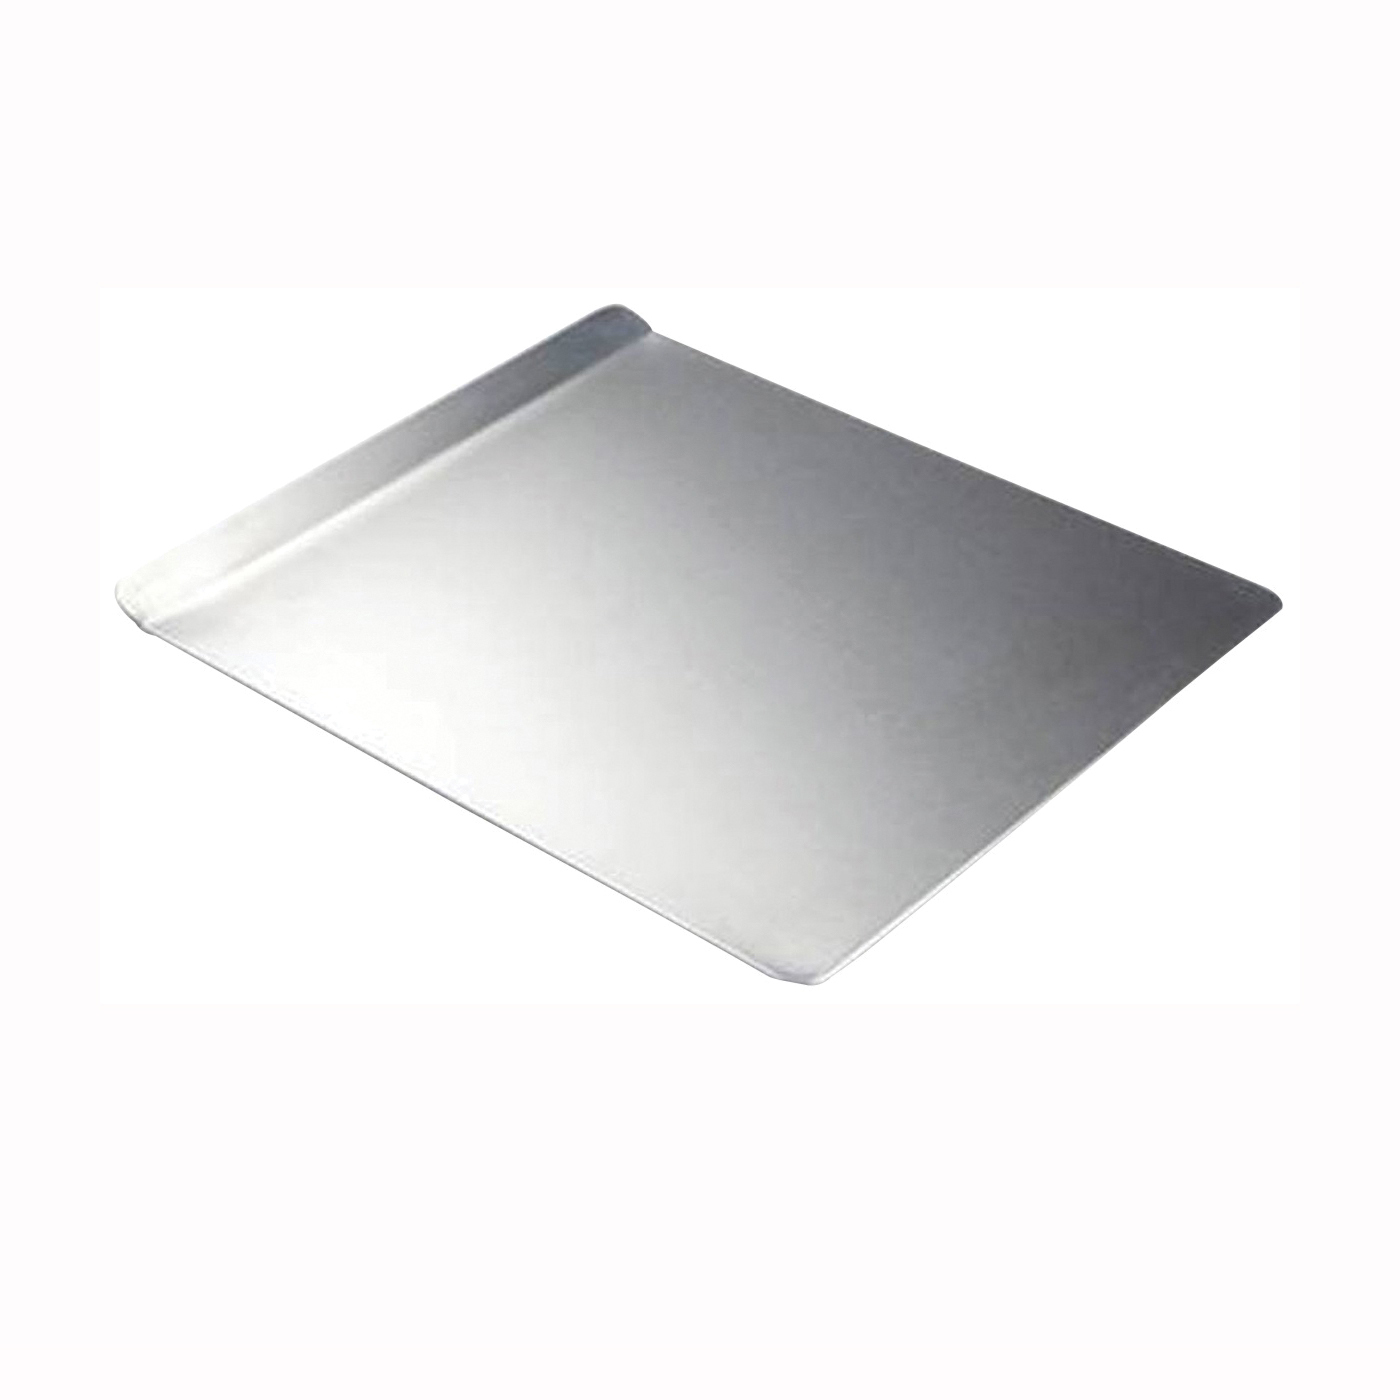 Bradshaw 04022 Good Cook Non-Stick Cookie Sheet 17 Inch By 11 Inch